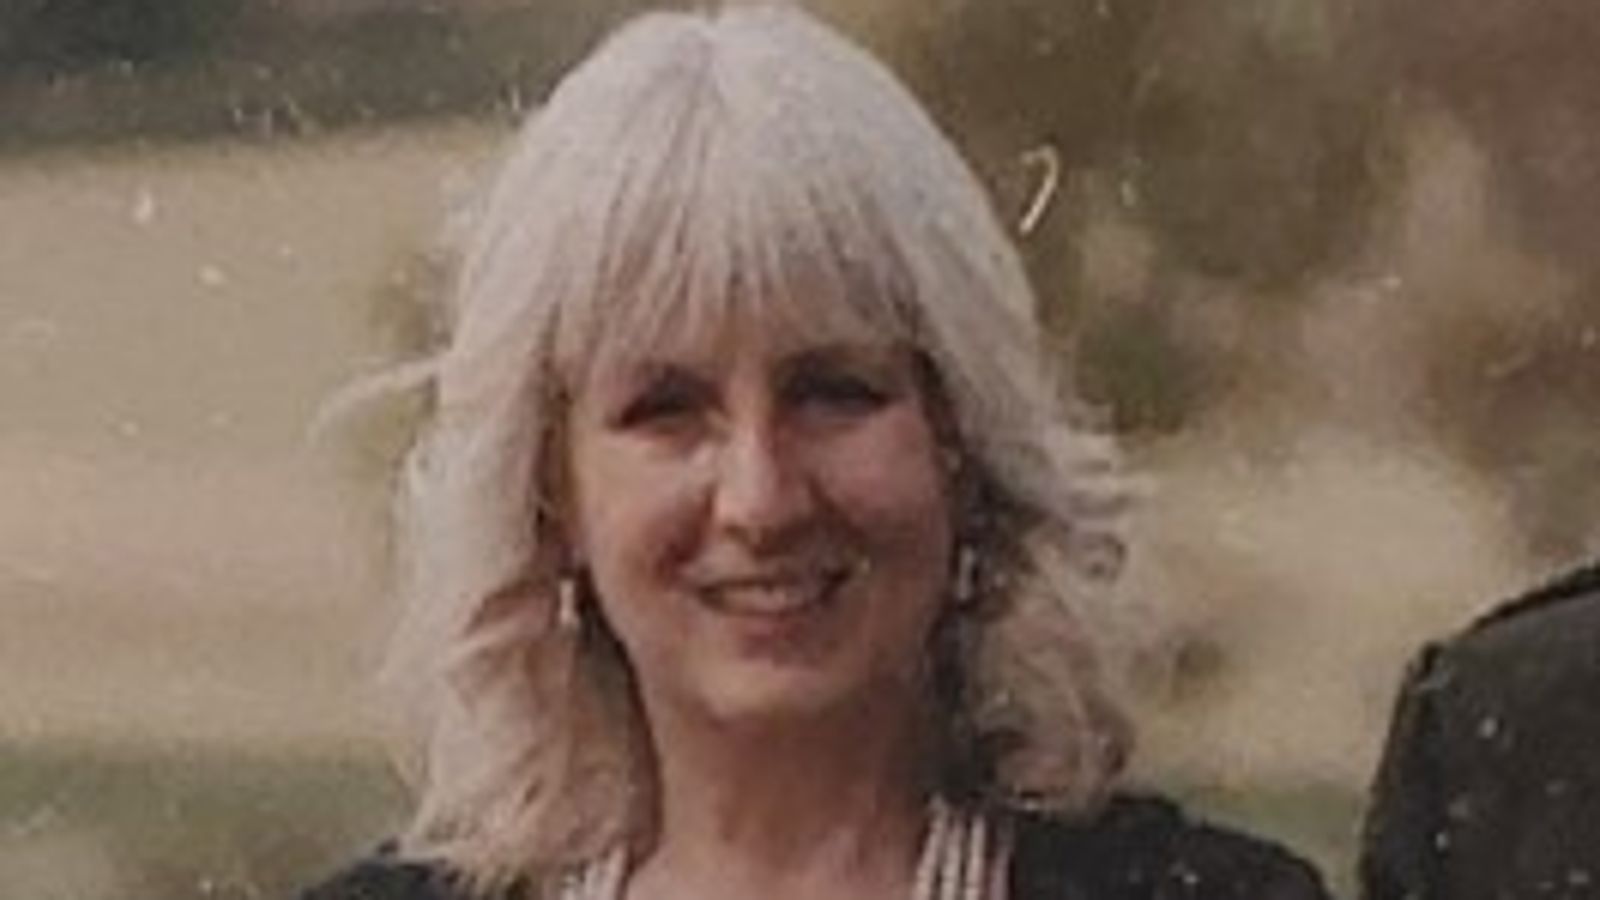 Body recovered from River Tay in search for missing woman Clare Marshall